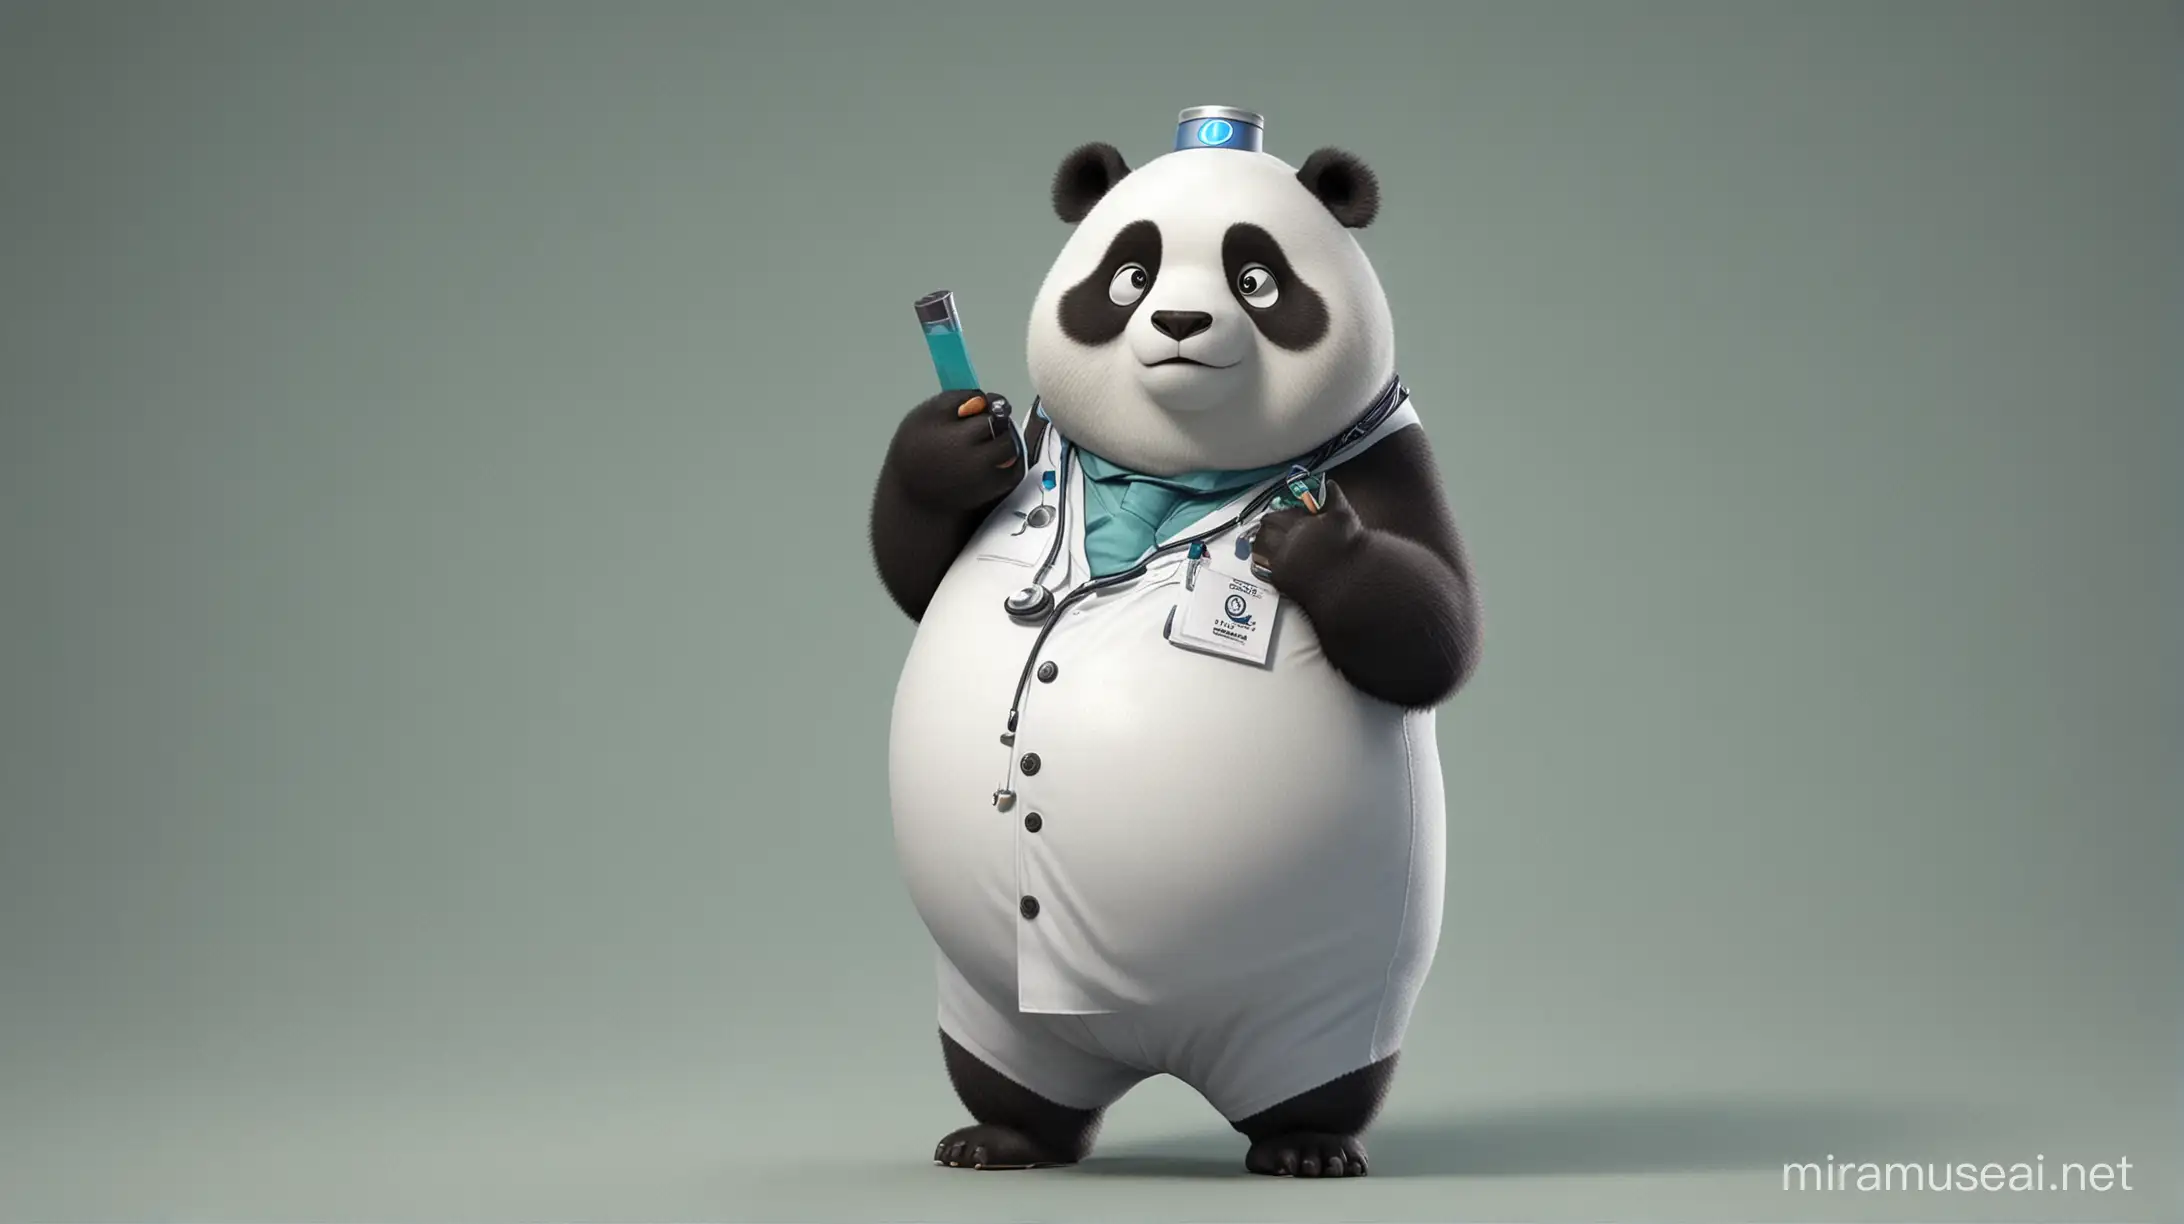 Chubby Panda Visits Caring Doctor for a CheckUp